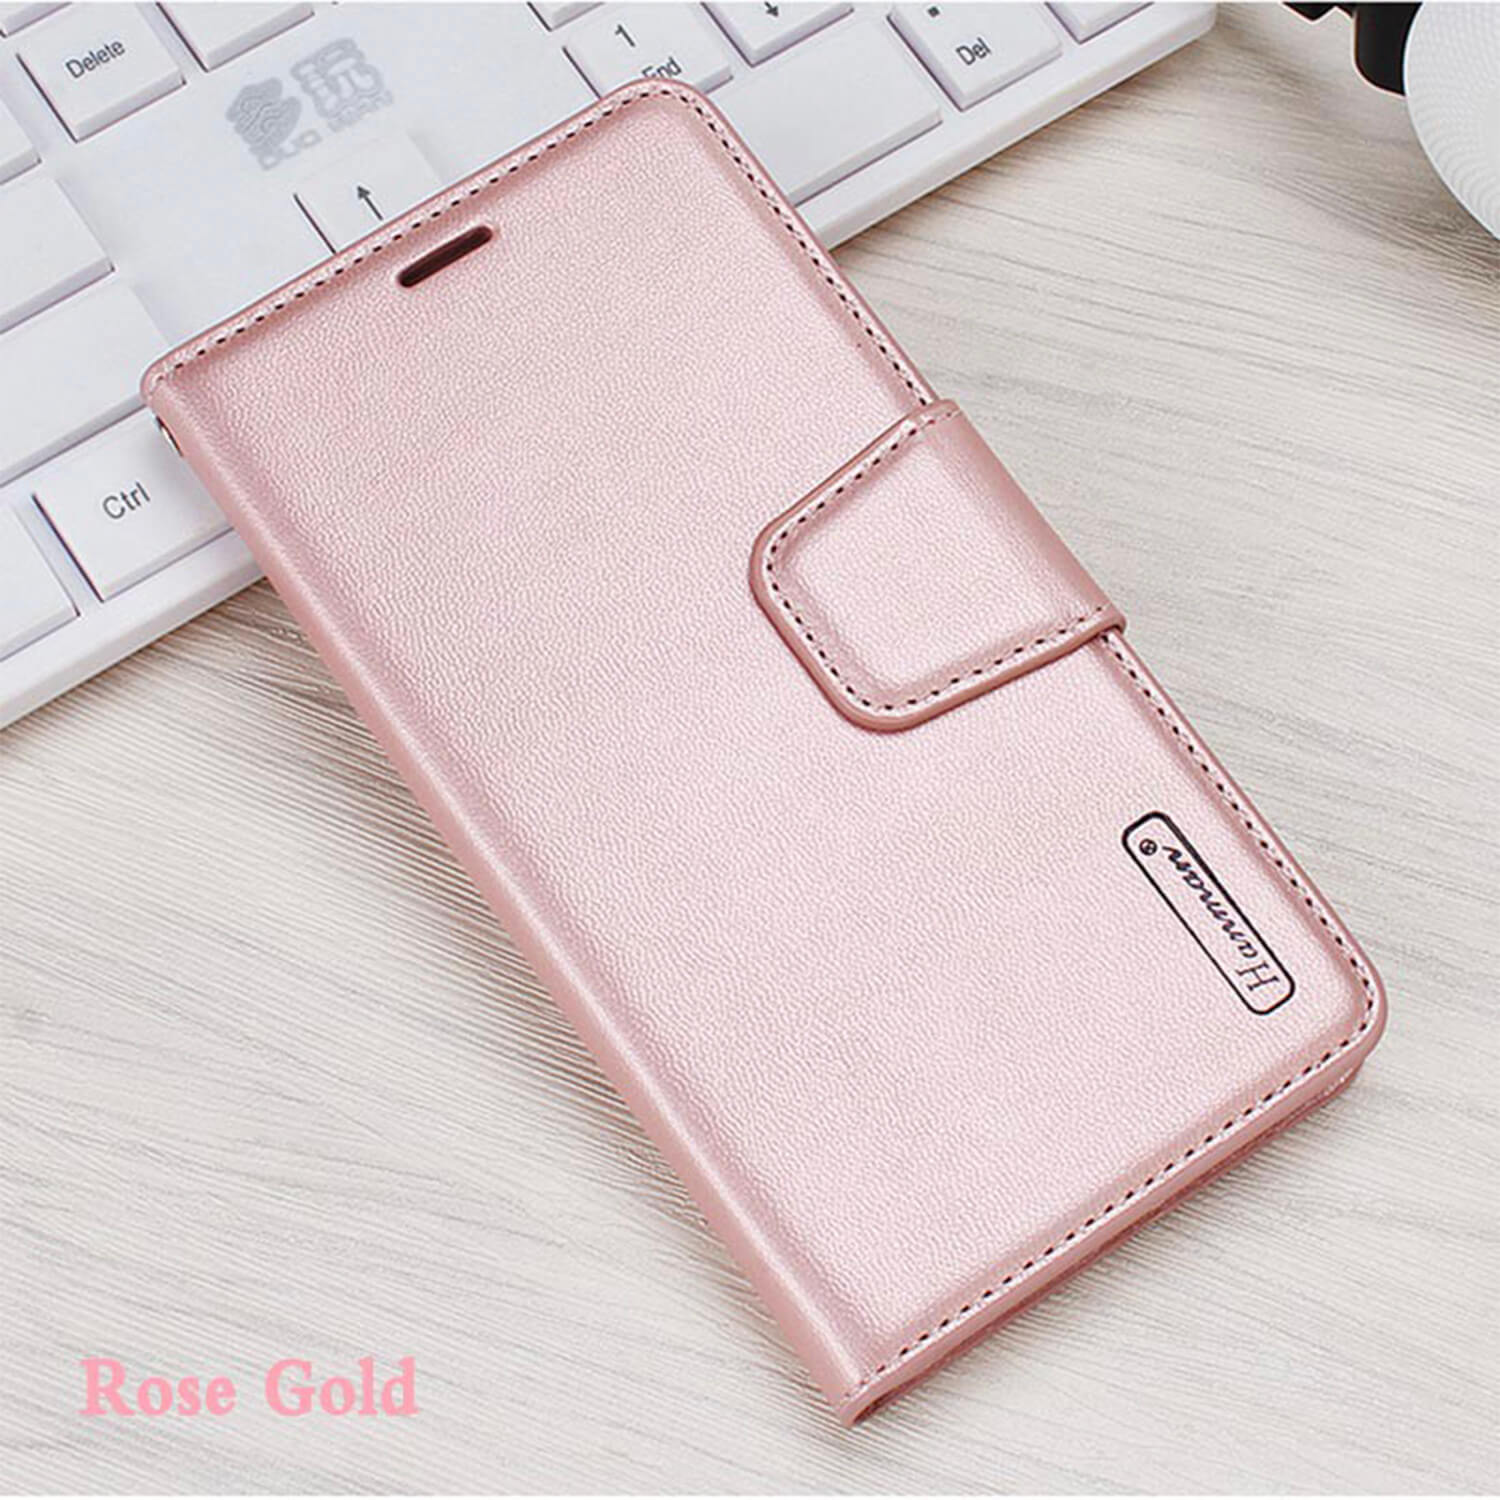 Hanman Samsung Galaxy A12 Leather Case Wallet Rose Gold